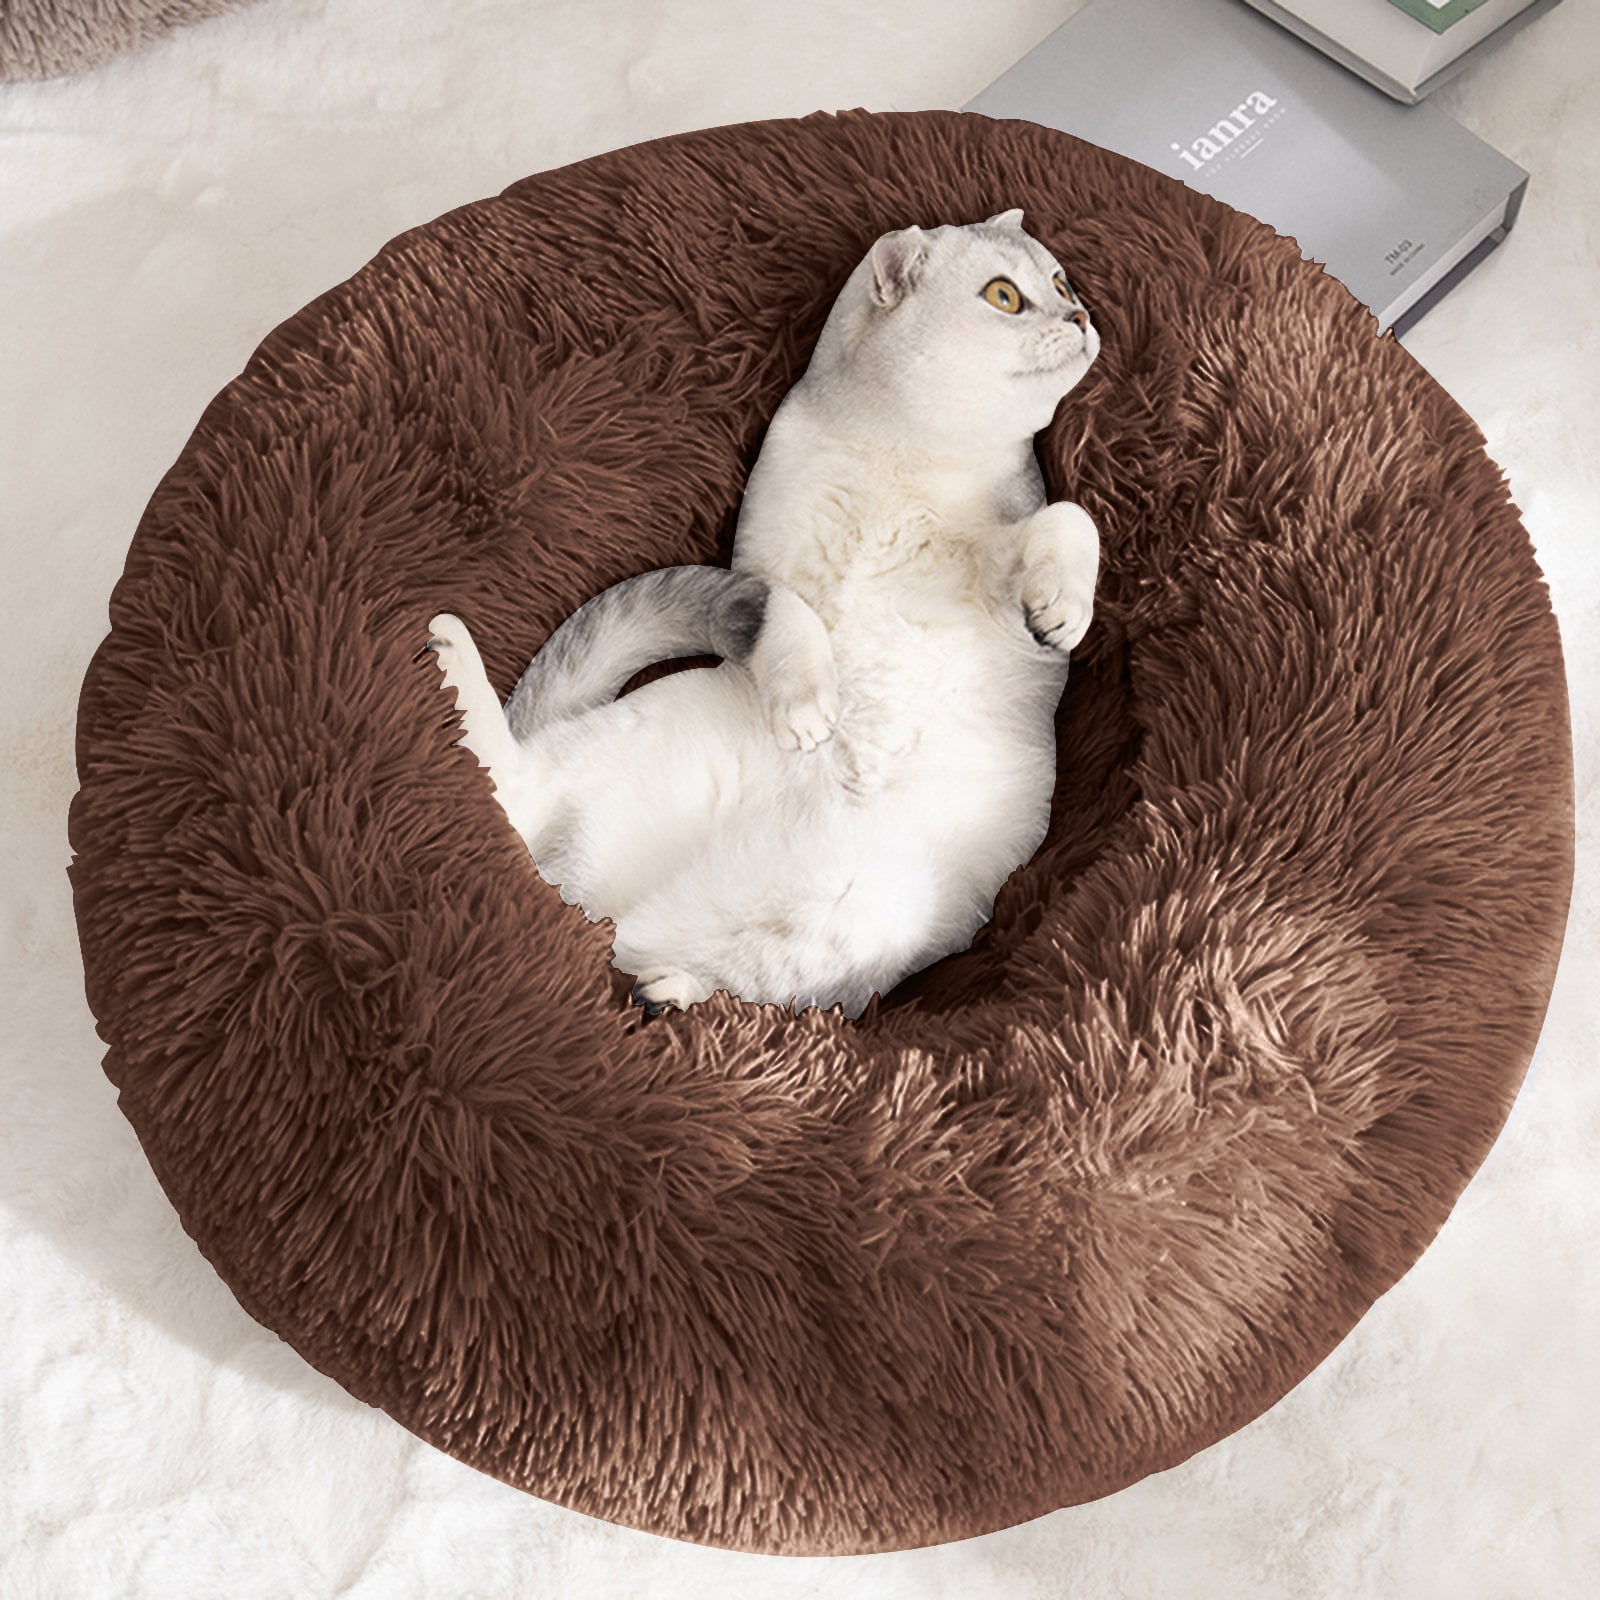 Dog Bed - Donut, Ginkgo Yellow / M